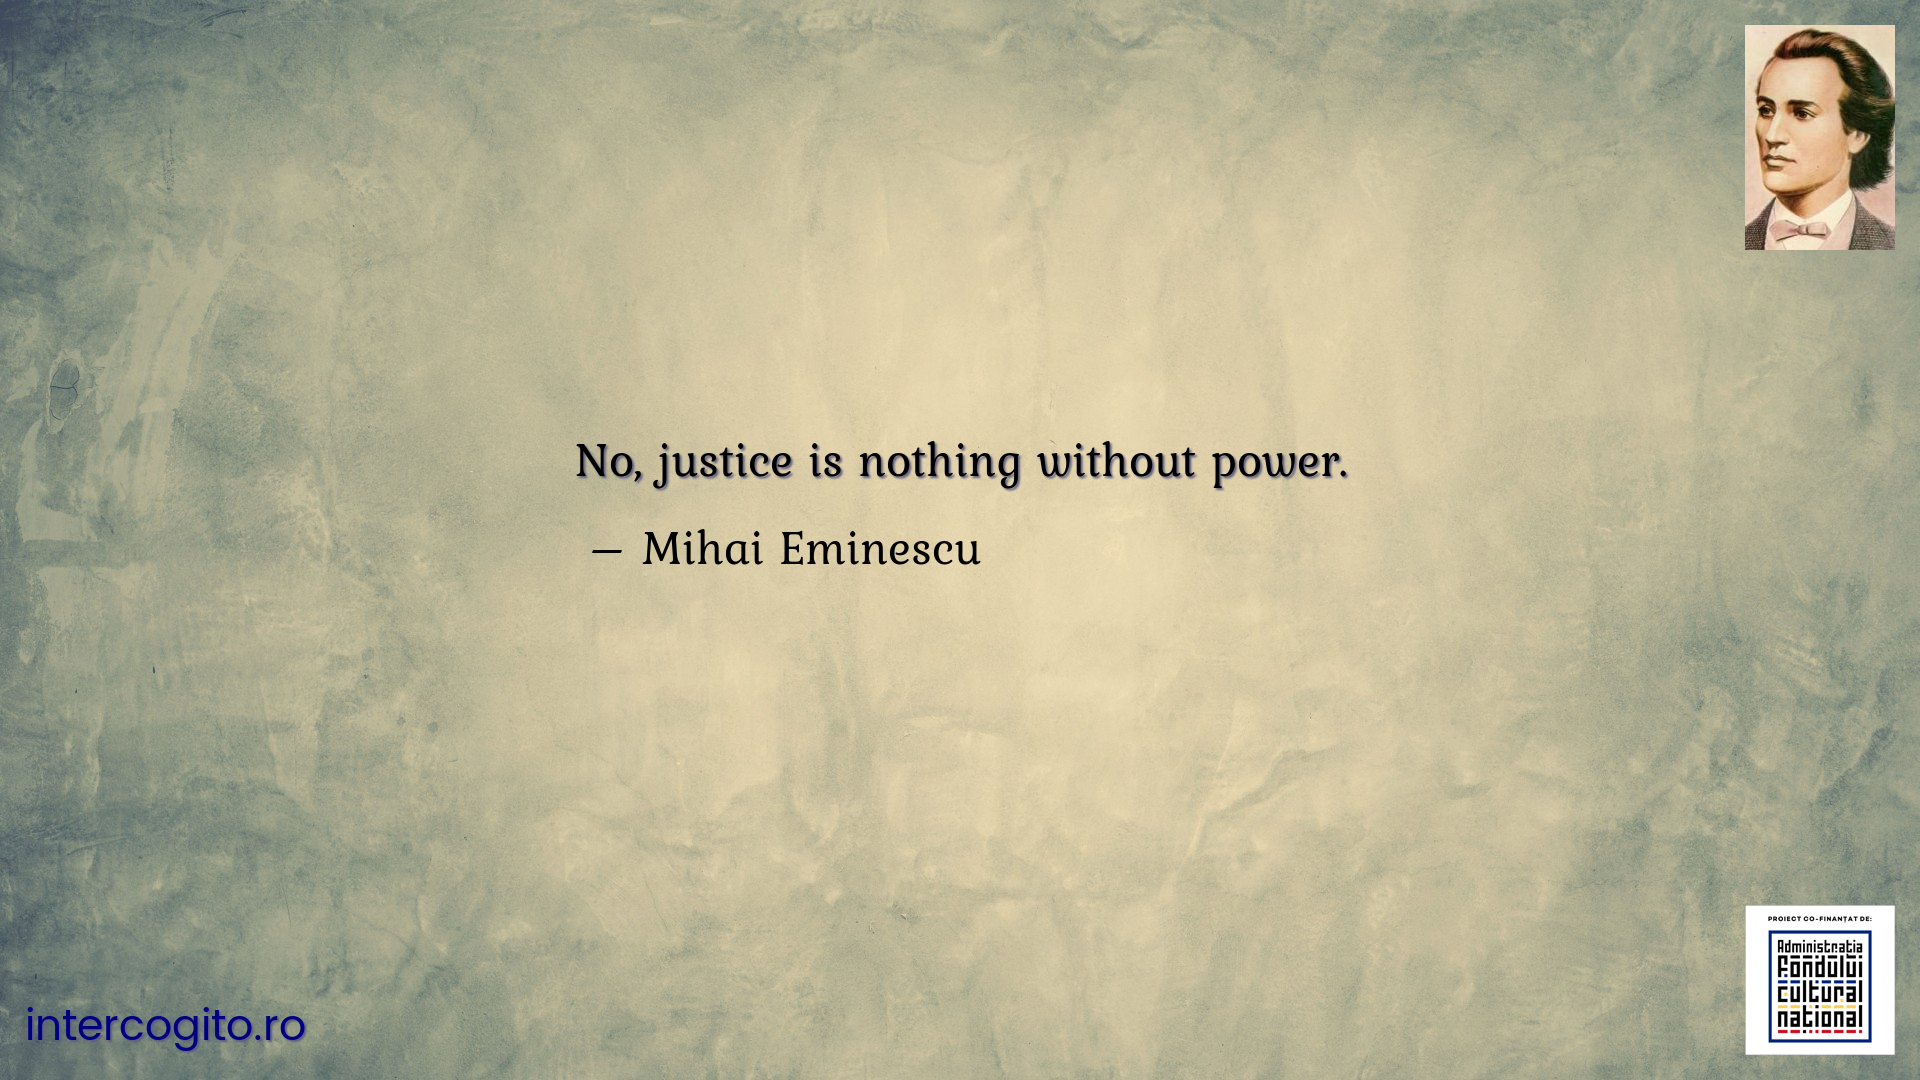 No, justice is nothing without power.